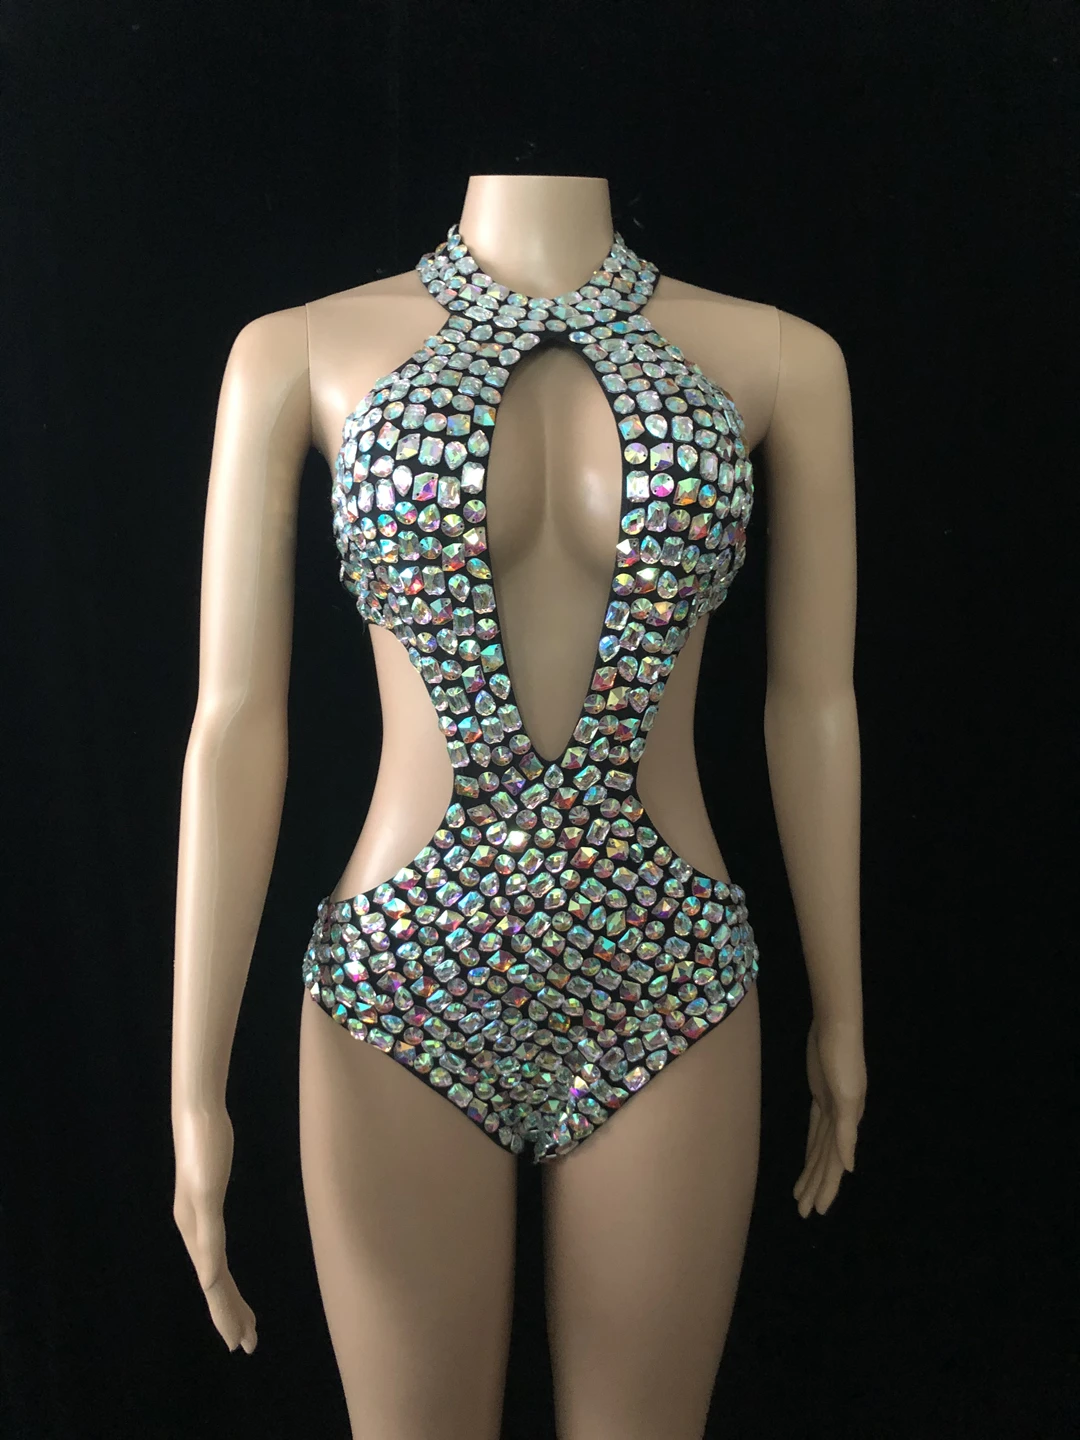 

Sparkling rhinestone backless crystal Skin-tight garment sexy stage clothing club party carnival clothing